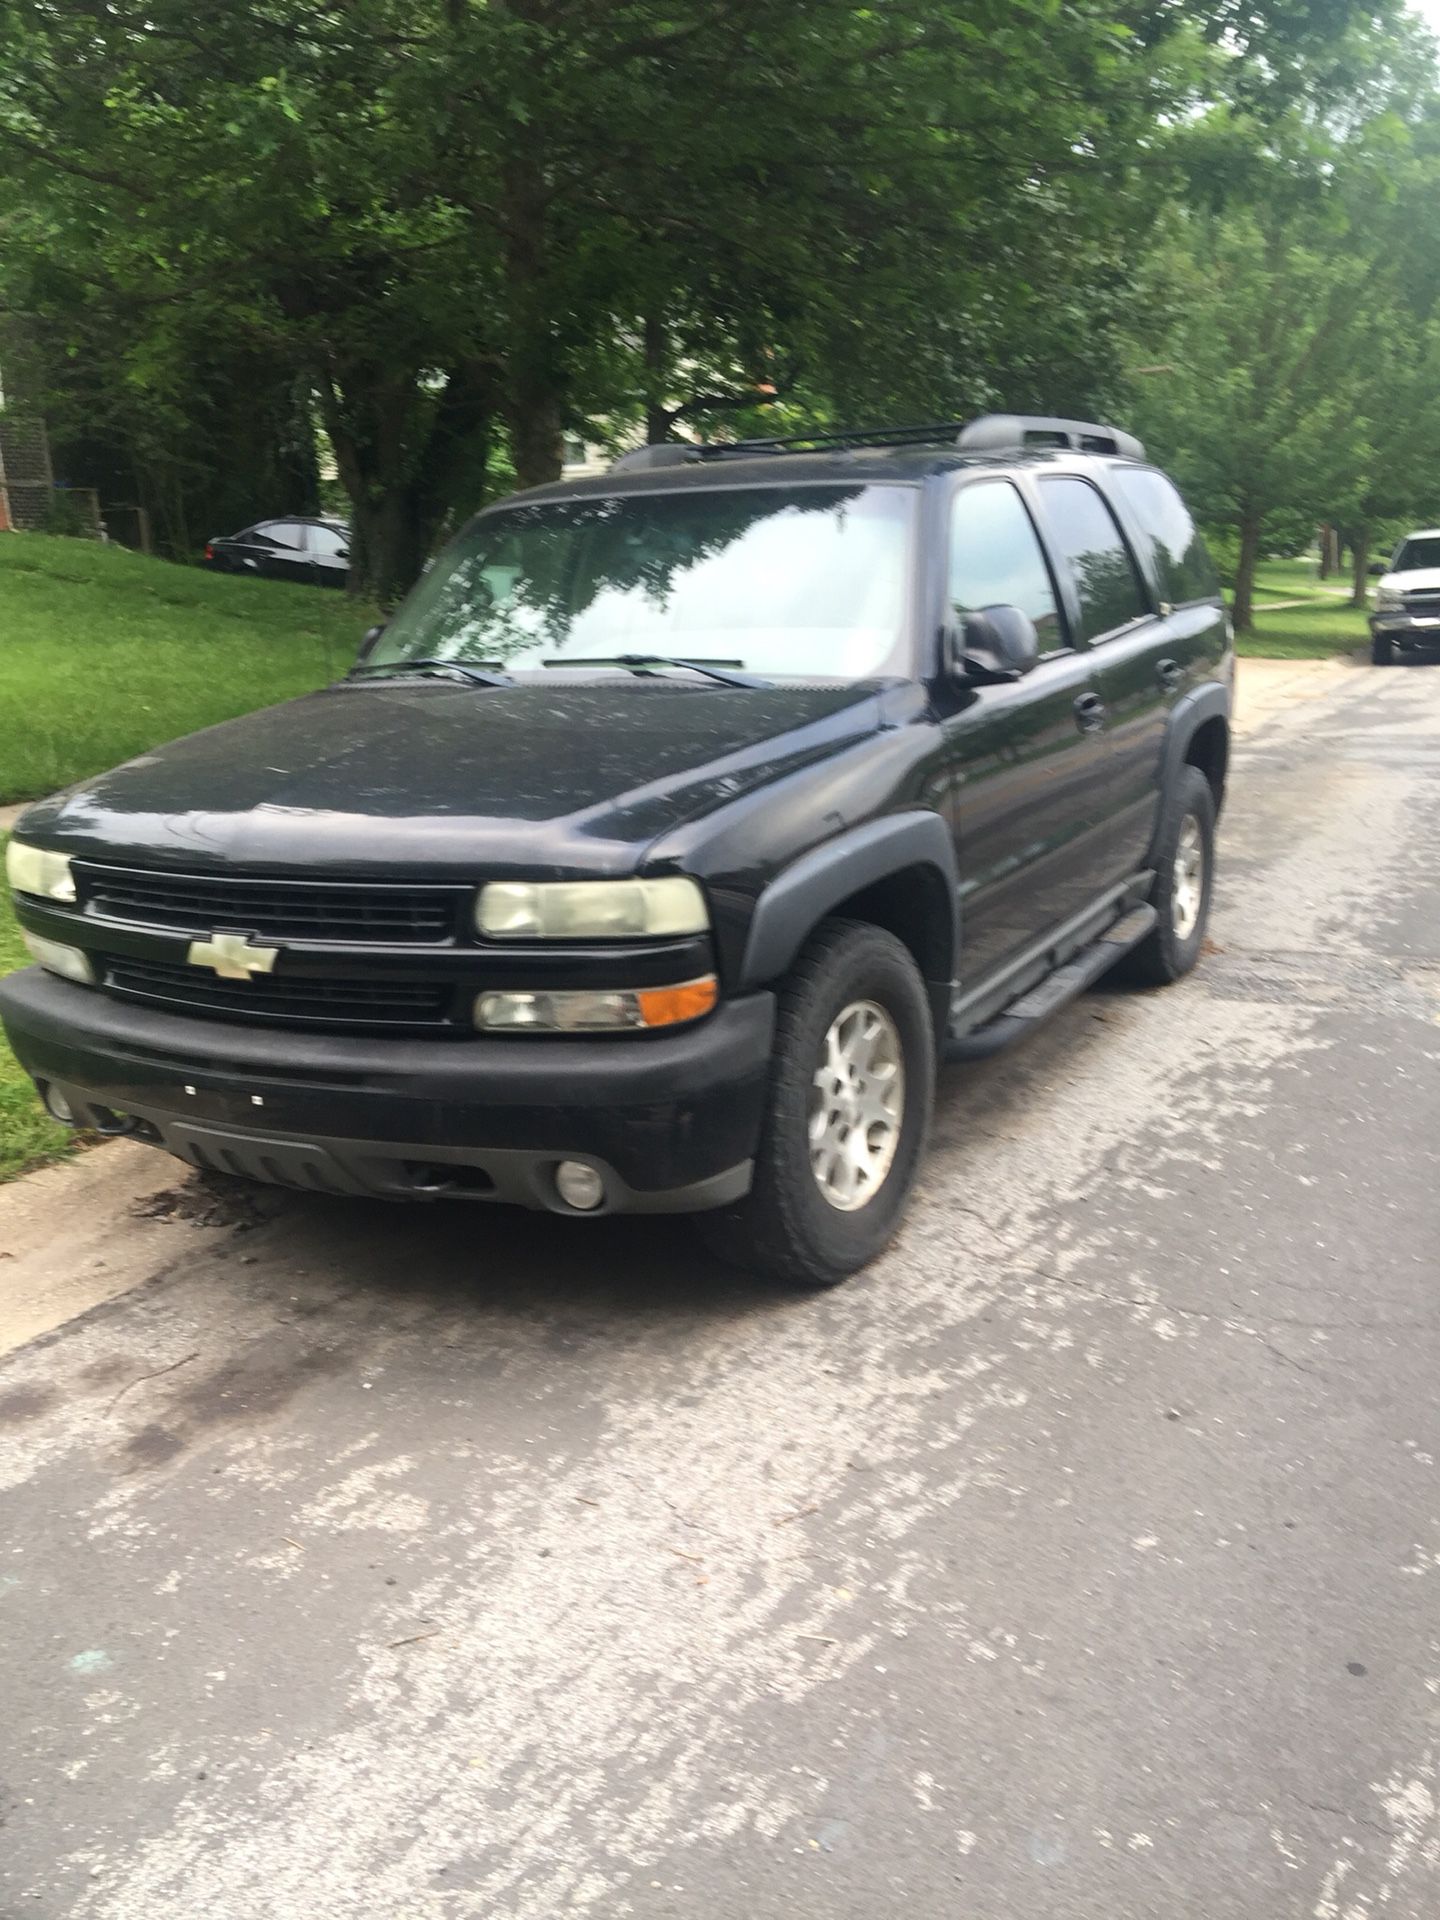 03 Chevy Tahoe z71 complete or for parts (no title)